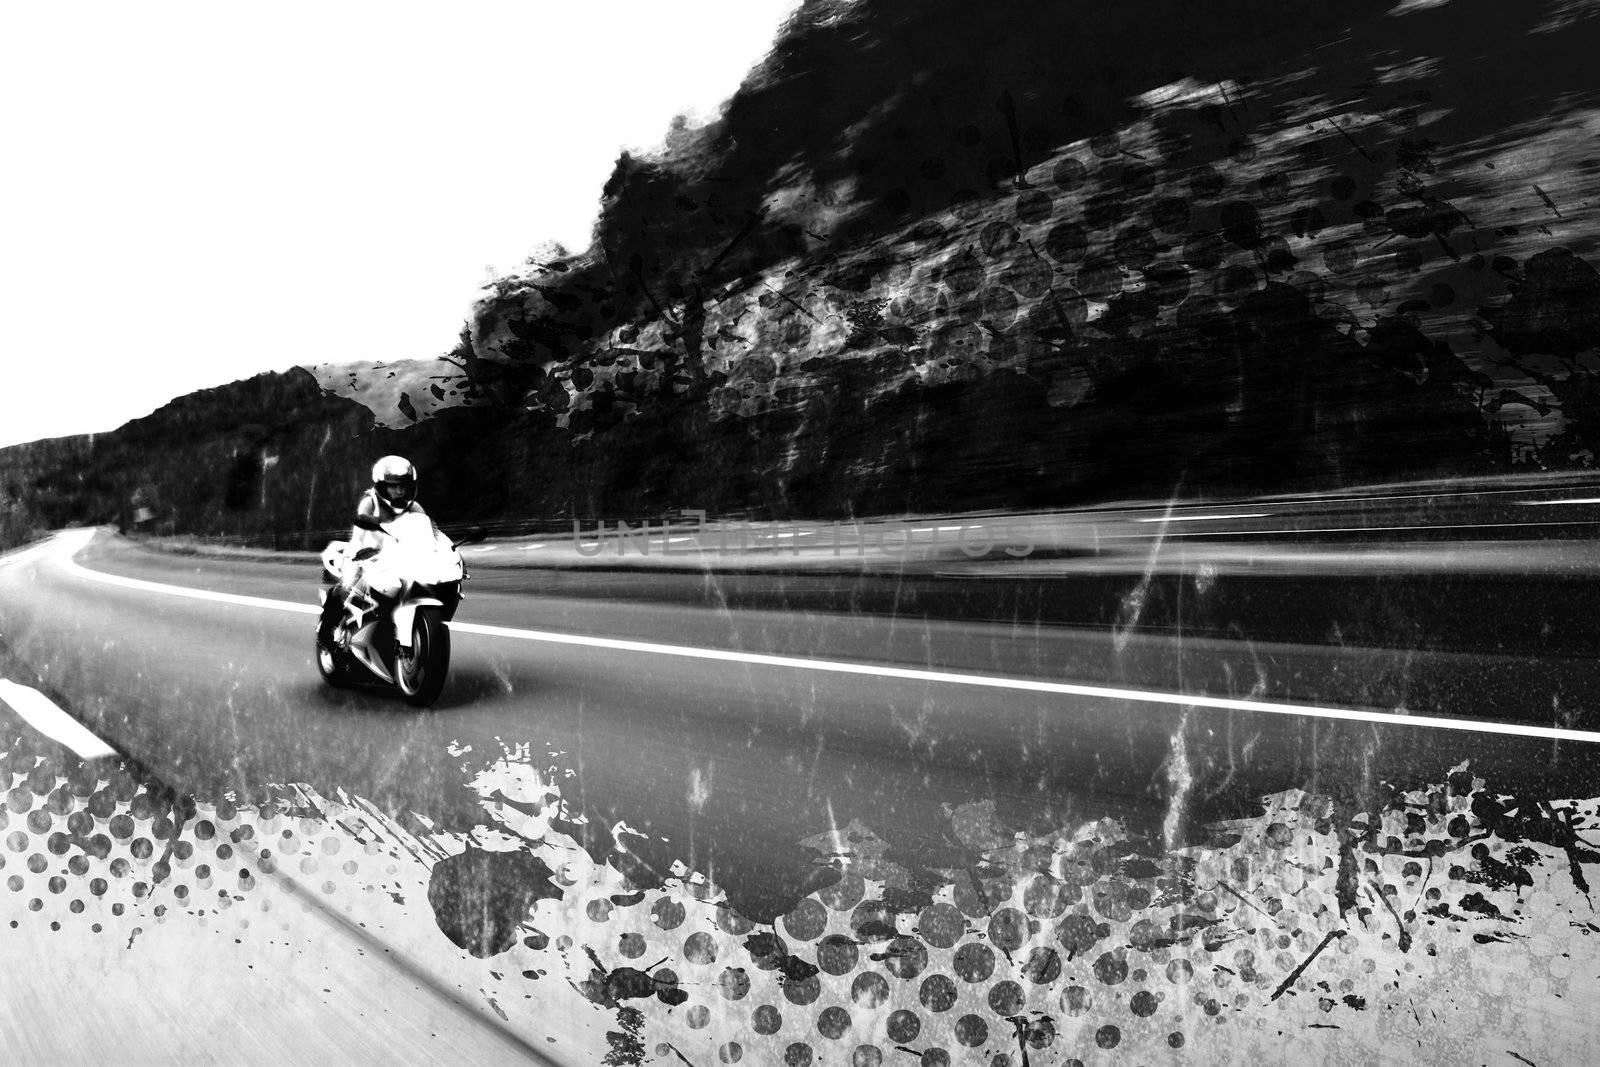 Abstract illustration of a woman driving a motorcycle at highway speeds with grunge halftone and splatter elements.